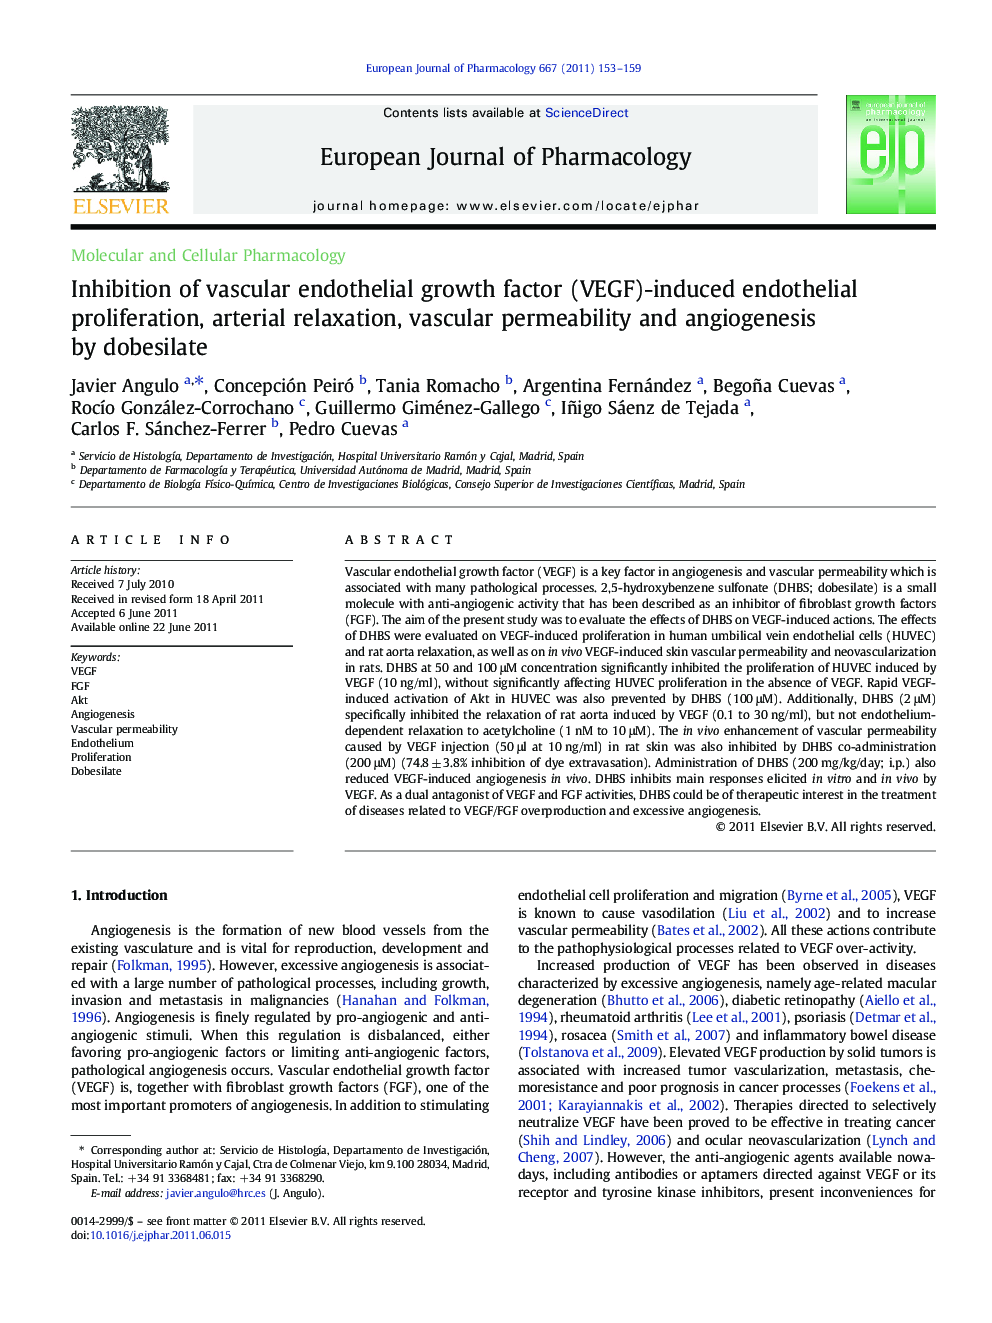 Inhibition of vascular endothelial growth factor (VEGF)-induced endothelial proliferation, arterial relaxation, vascular permeability and angiogenesis by dobesilate